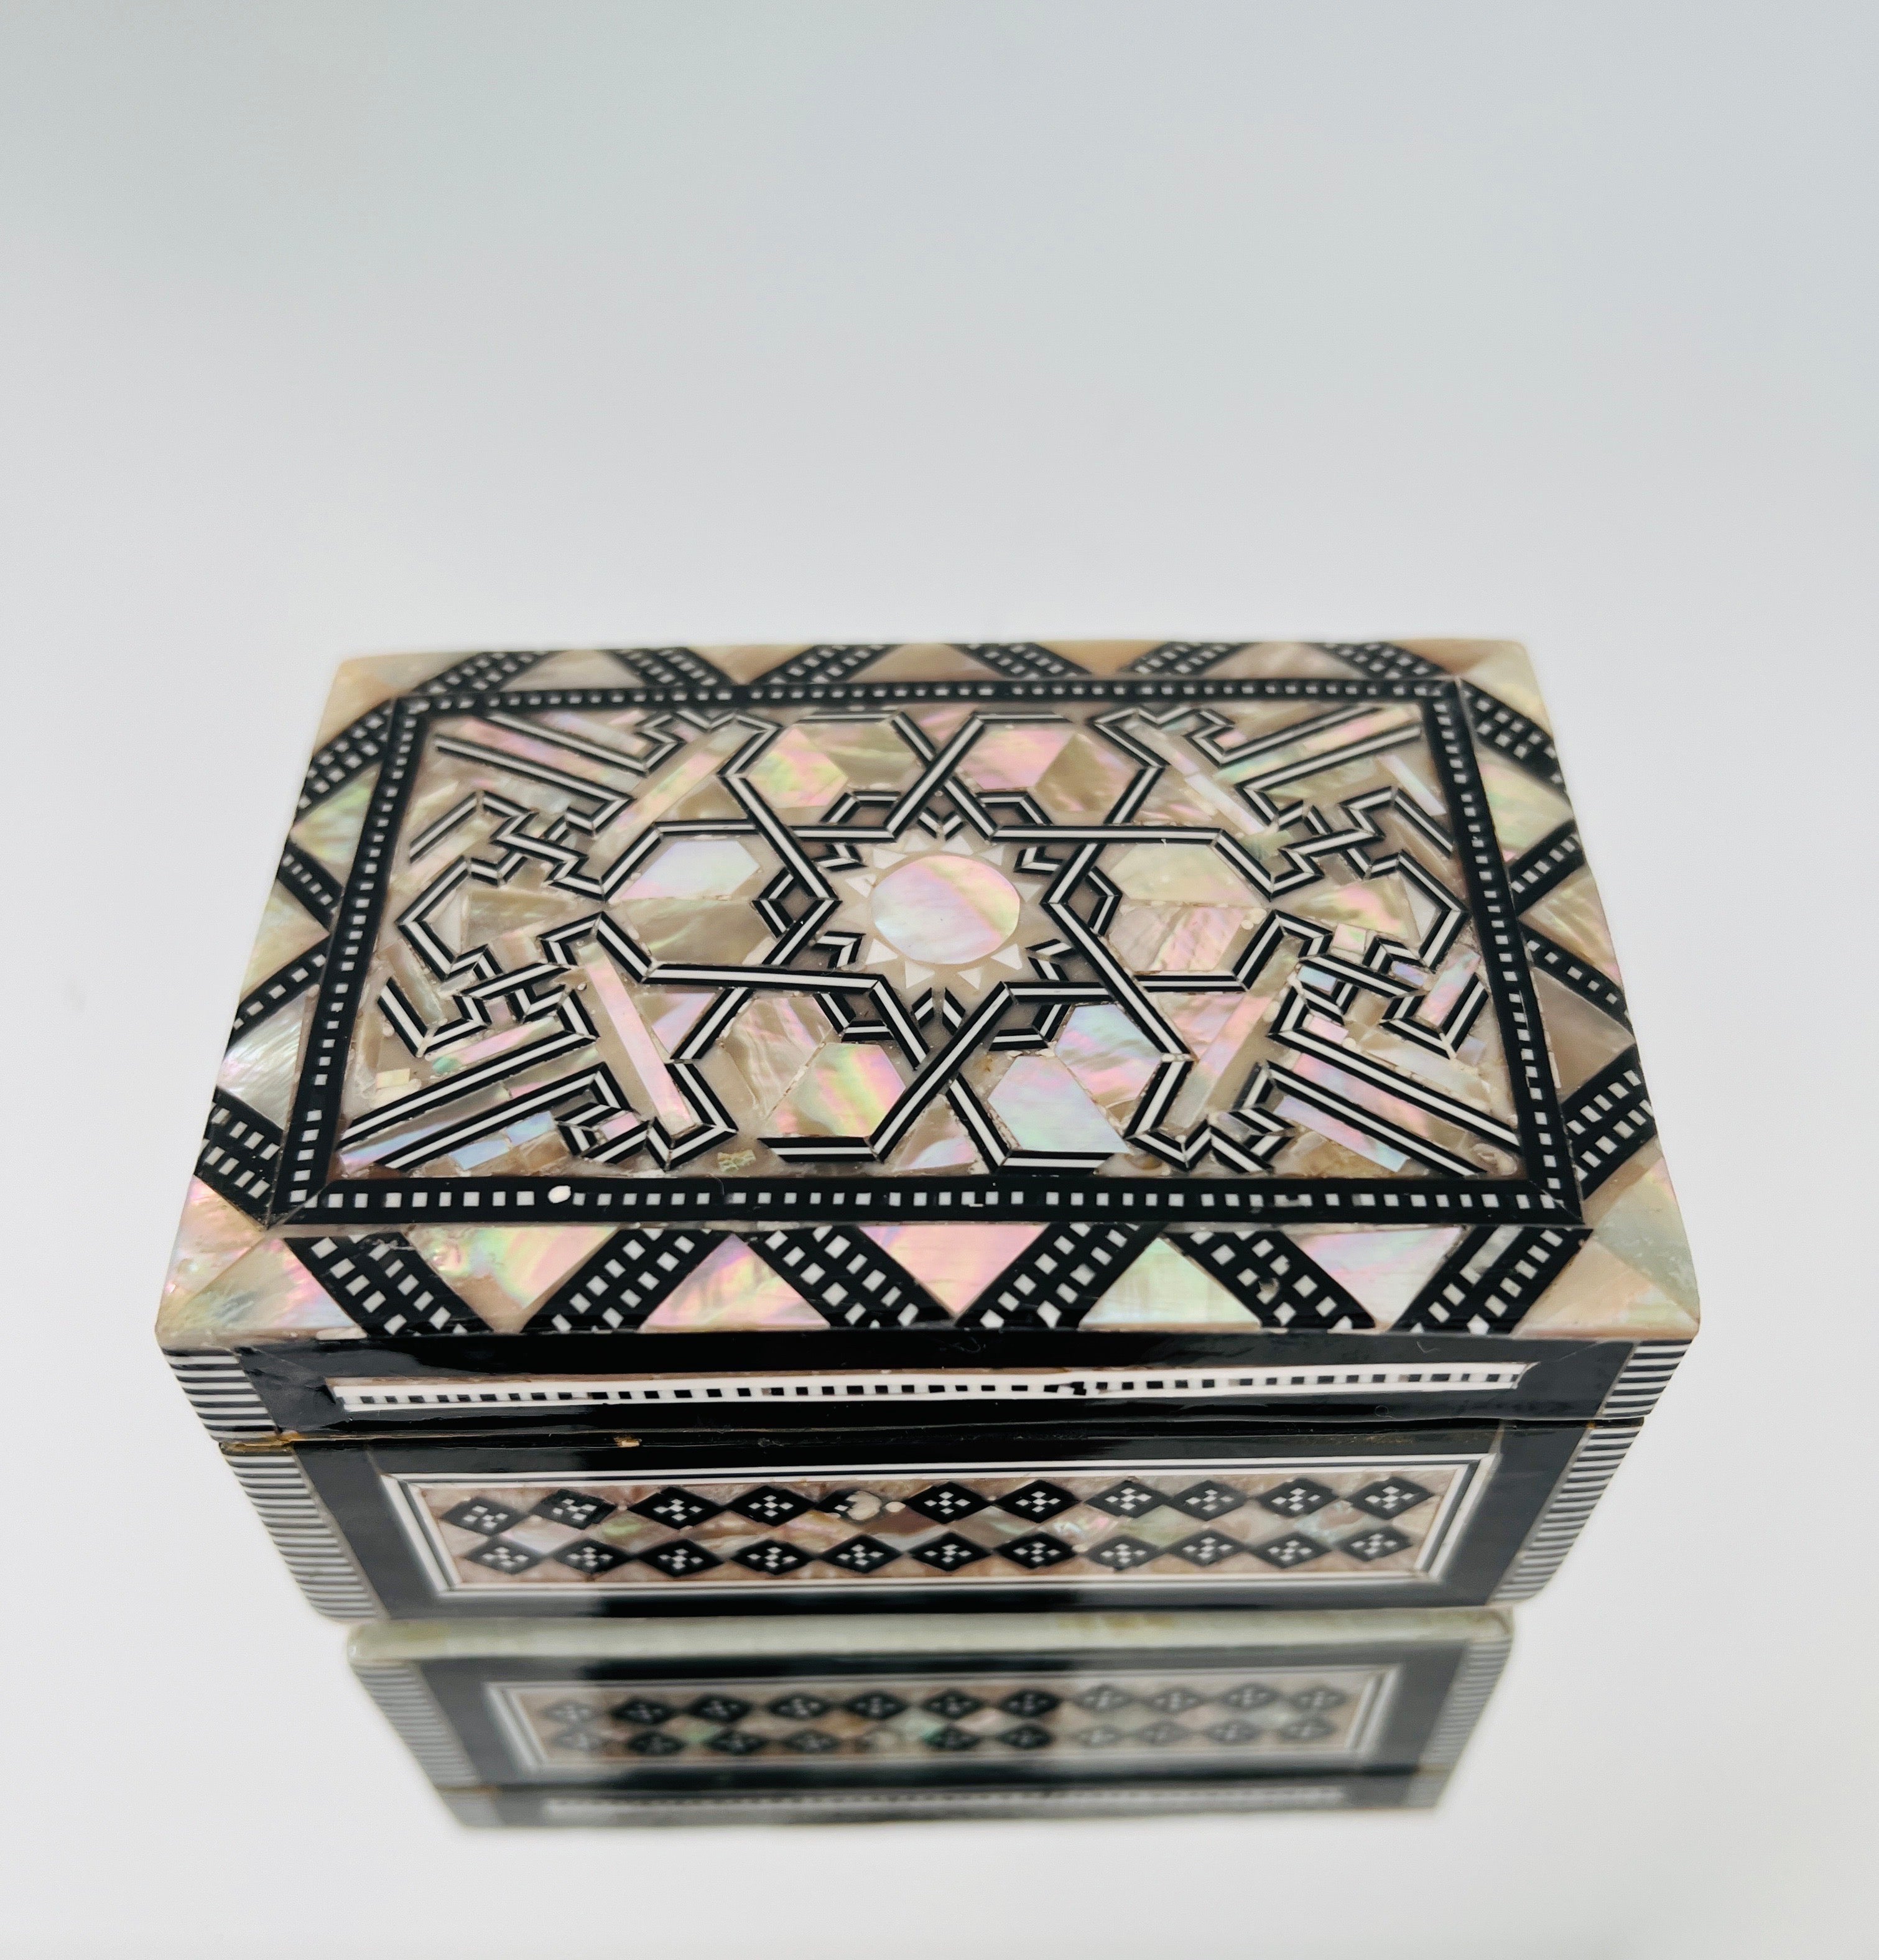 Exquisite handcrafted geometric wood box with micro mosaic inlays of mother of pearl in Khatam artistry, an Ancient Persian technique of inlaying. Moorish style box also features geometric bone inlays over wood with a hinged lid and interior lined